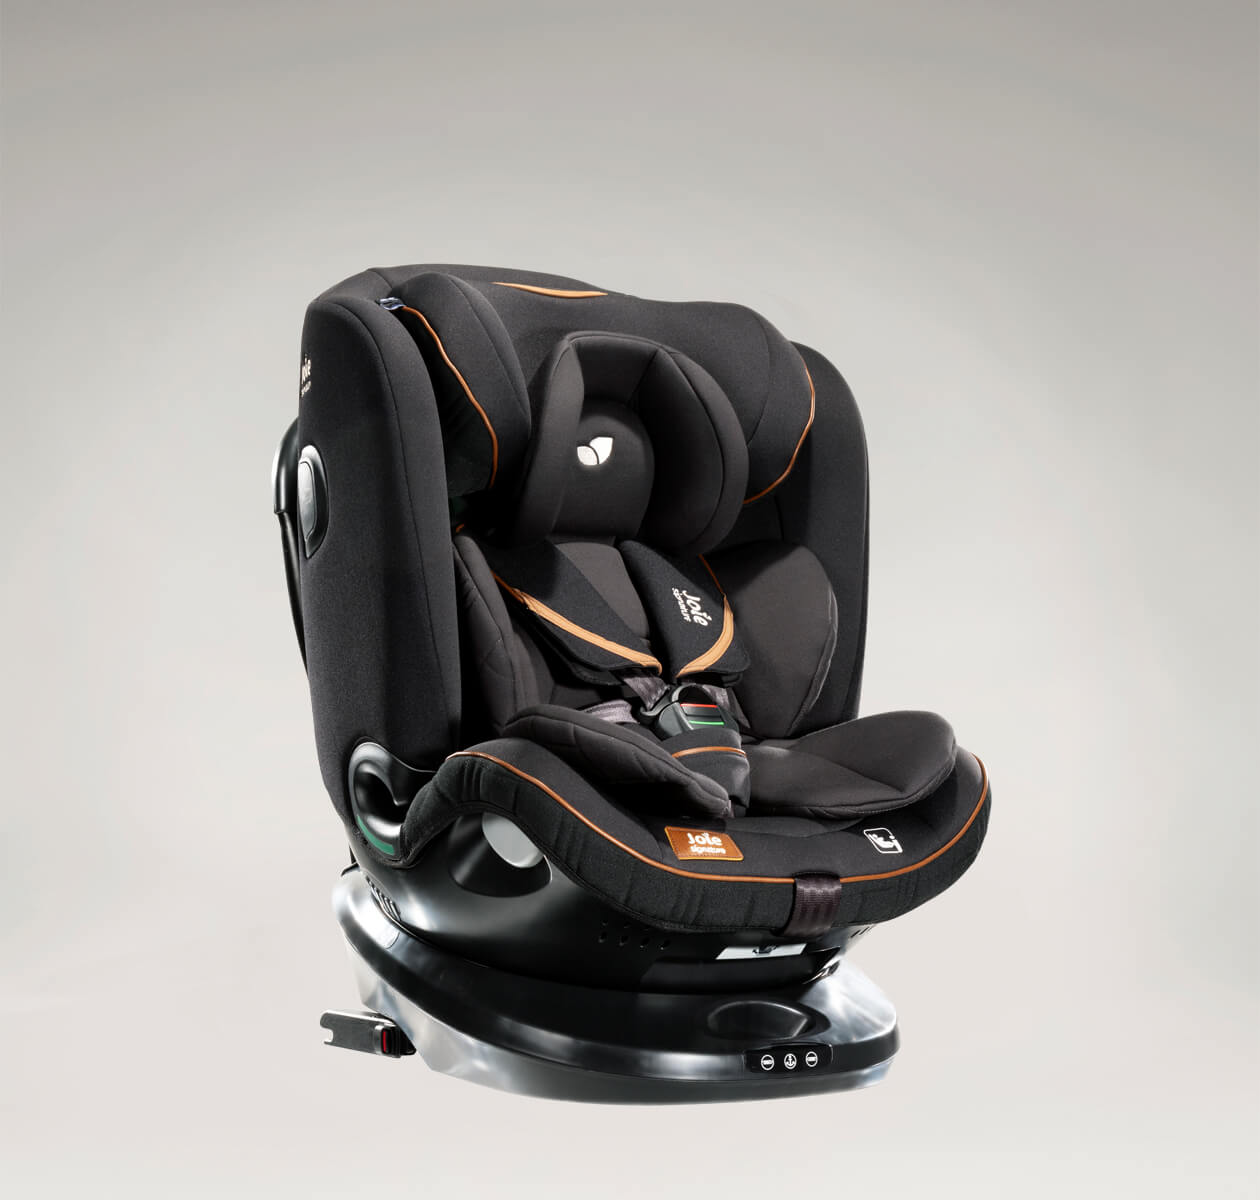  Joie i-Spin Grow car seat in black at an angle.